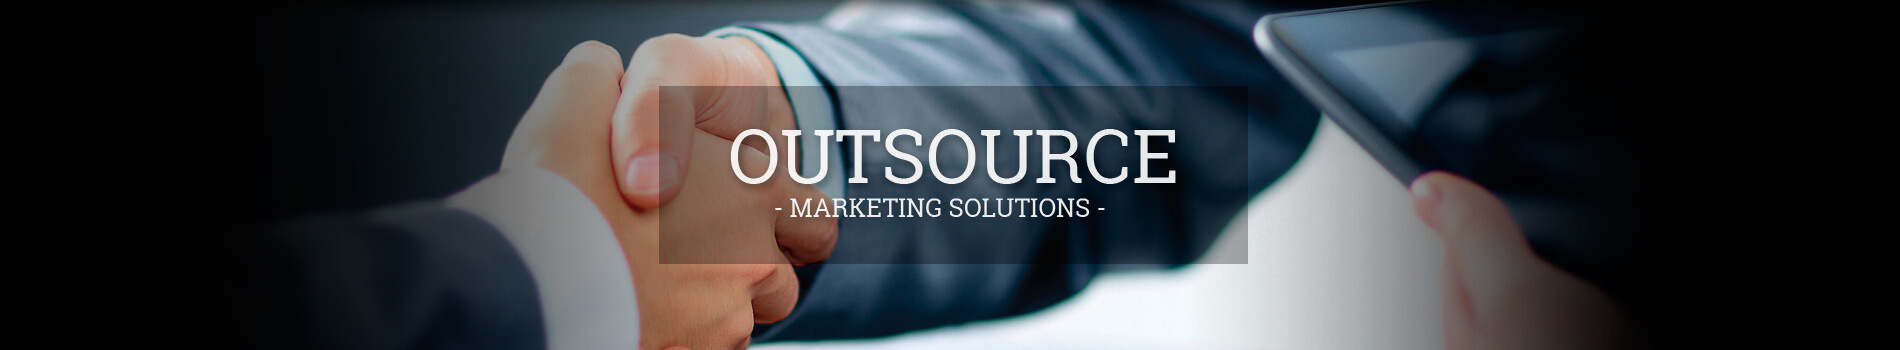 , Outsource Marketing Solutions, Anchor Business &amp; IT Consulting, Digital Marketing &amp; Training Services